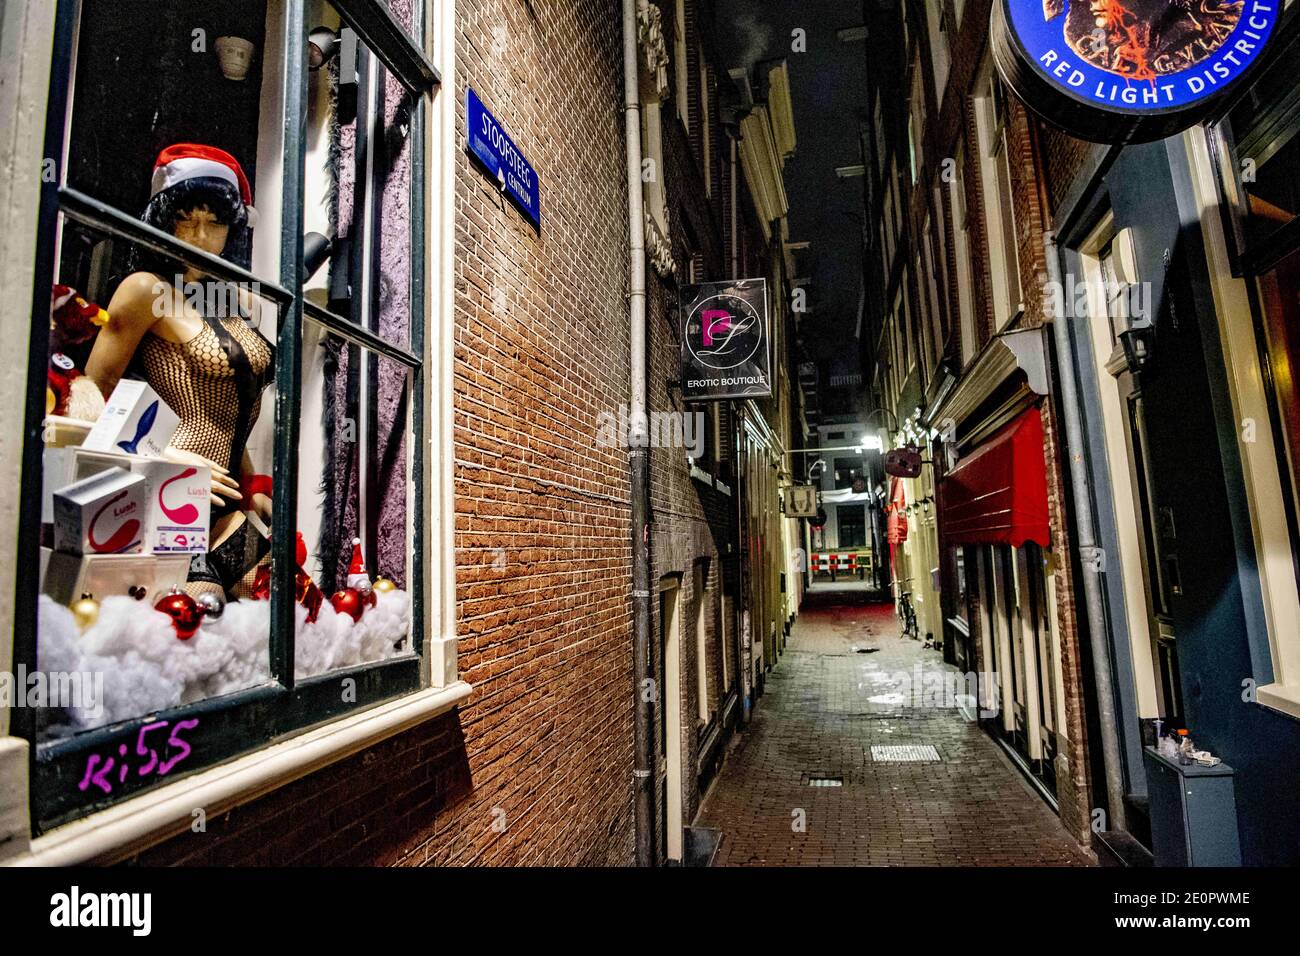 Netherlands. 02nd Jan, 2021. Empty red light district in Amsterdam, the Netherlands, on January 01, 2020, during the Covid-19 lockdown. streets are quiet due to the corona rules and